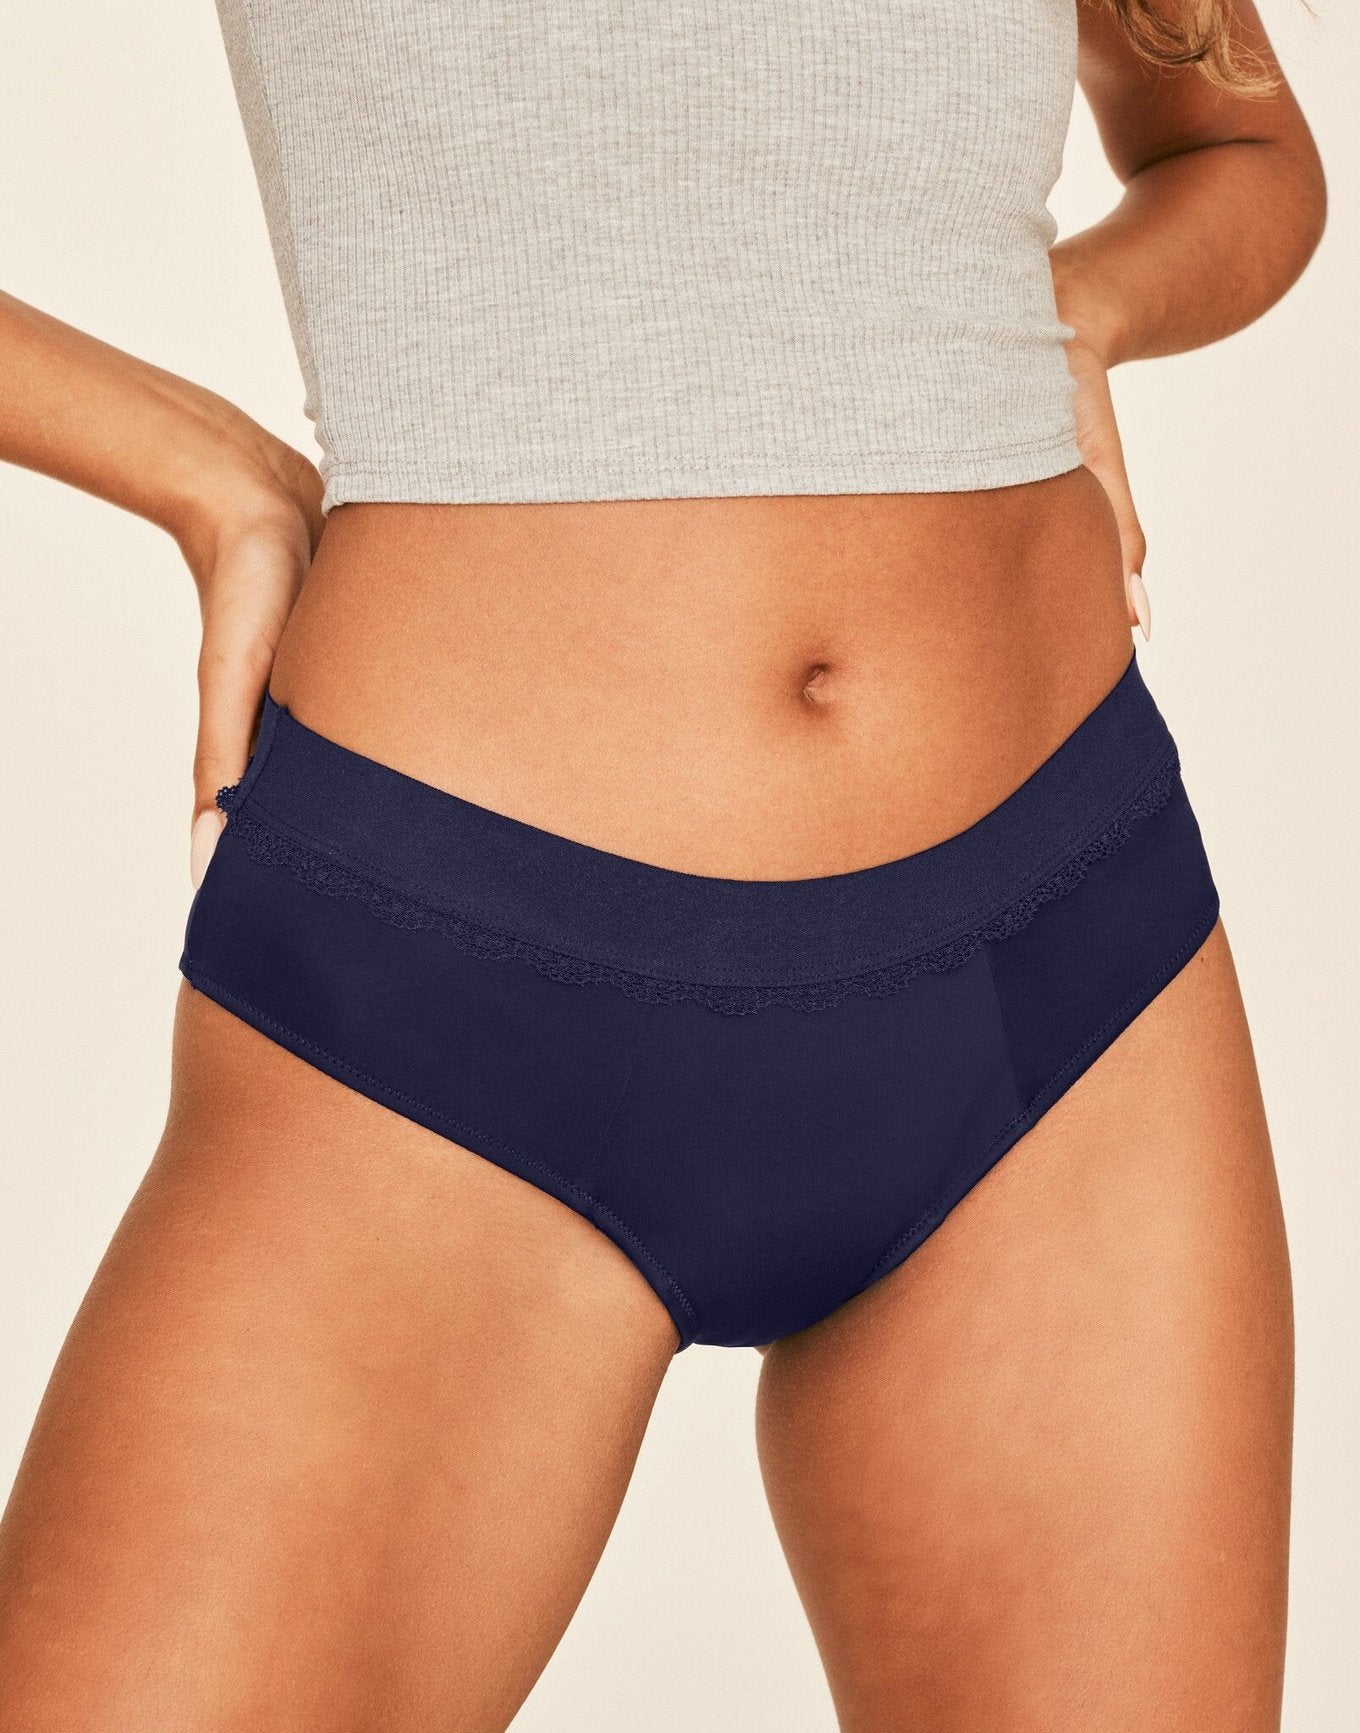 Joyja Cindy period-proof panty in color Evening Blue and shape cheeky